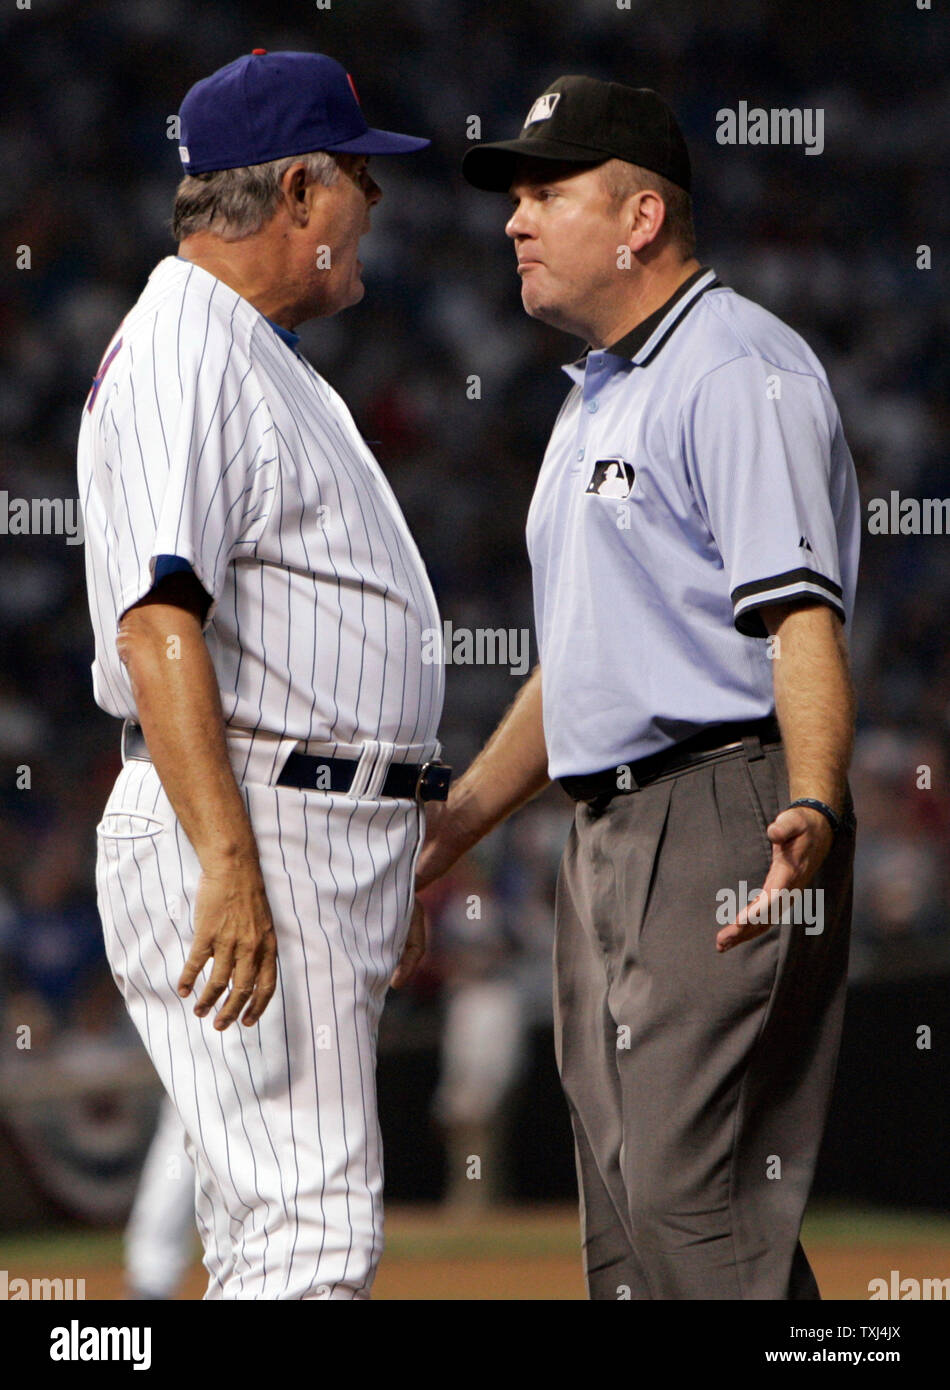 Cubs Manager Lou Piniella to Retire After Sunday's Game - WSJ